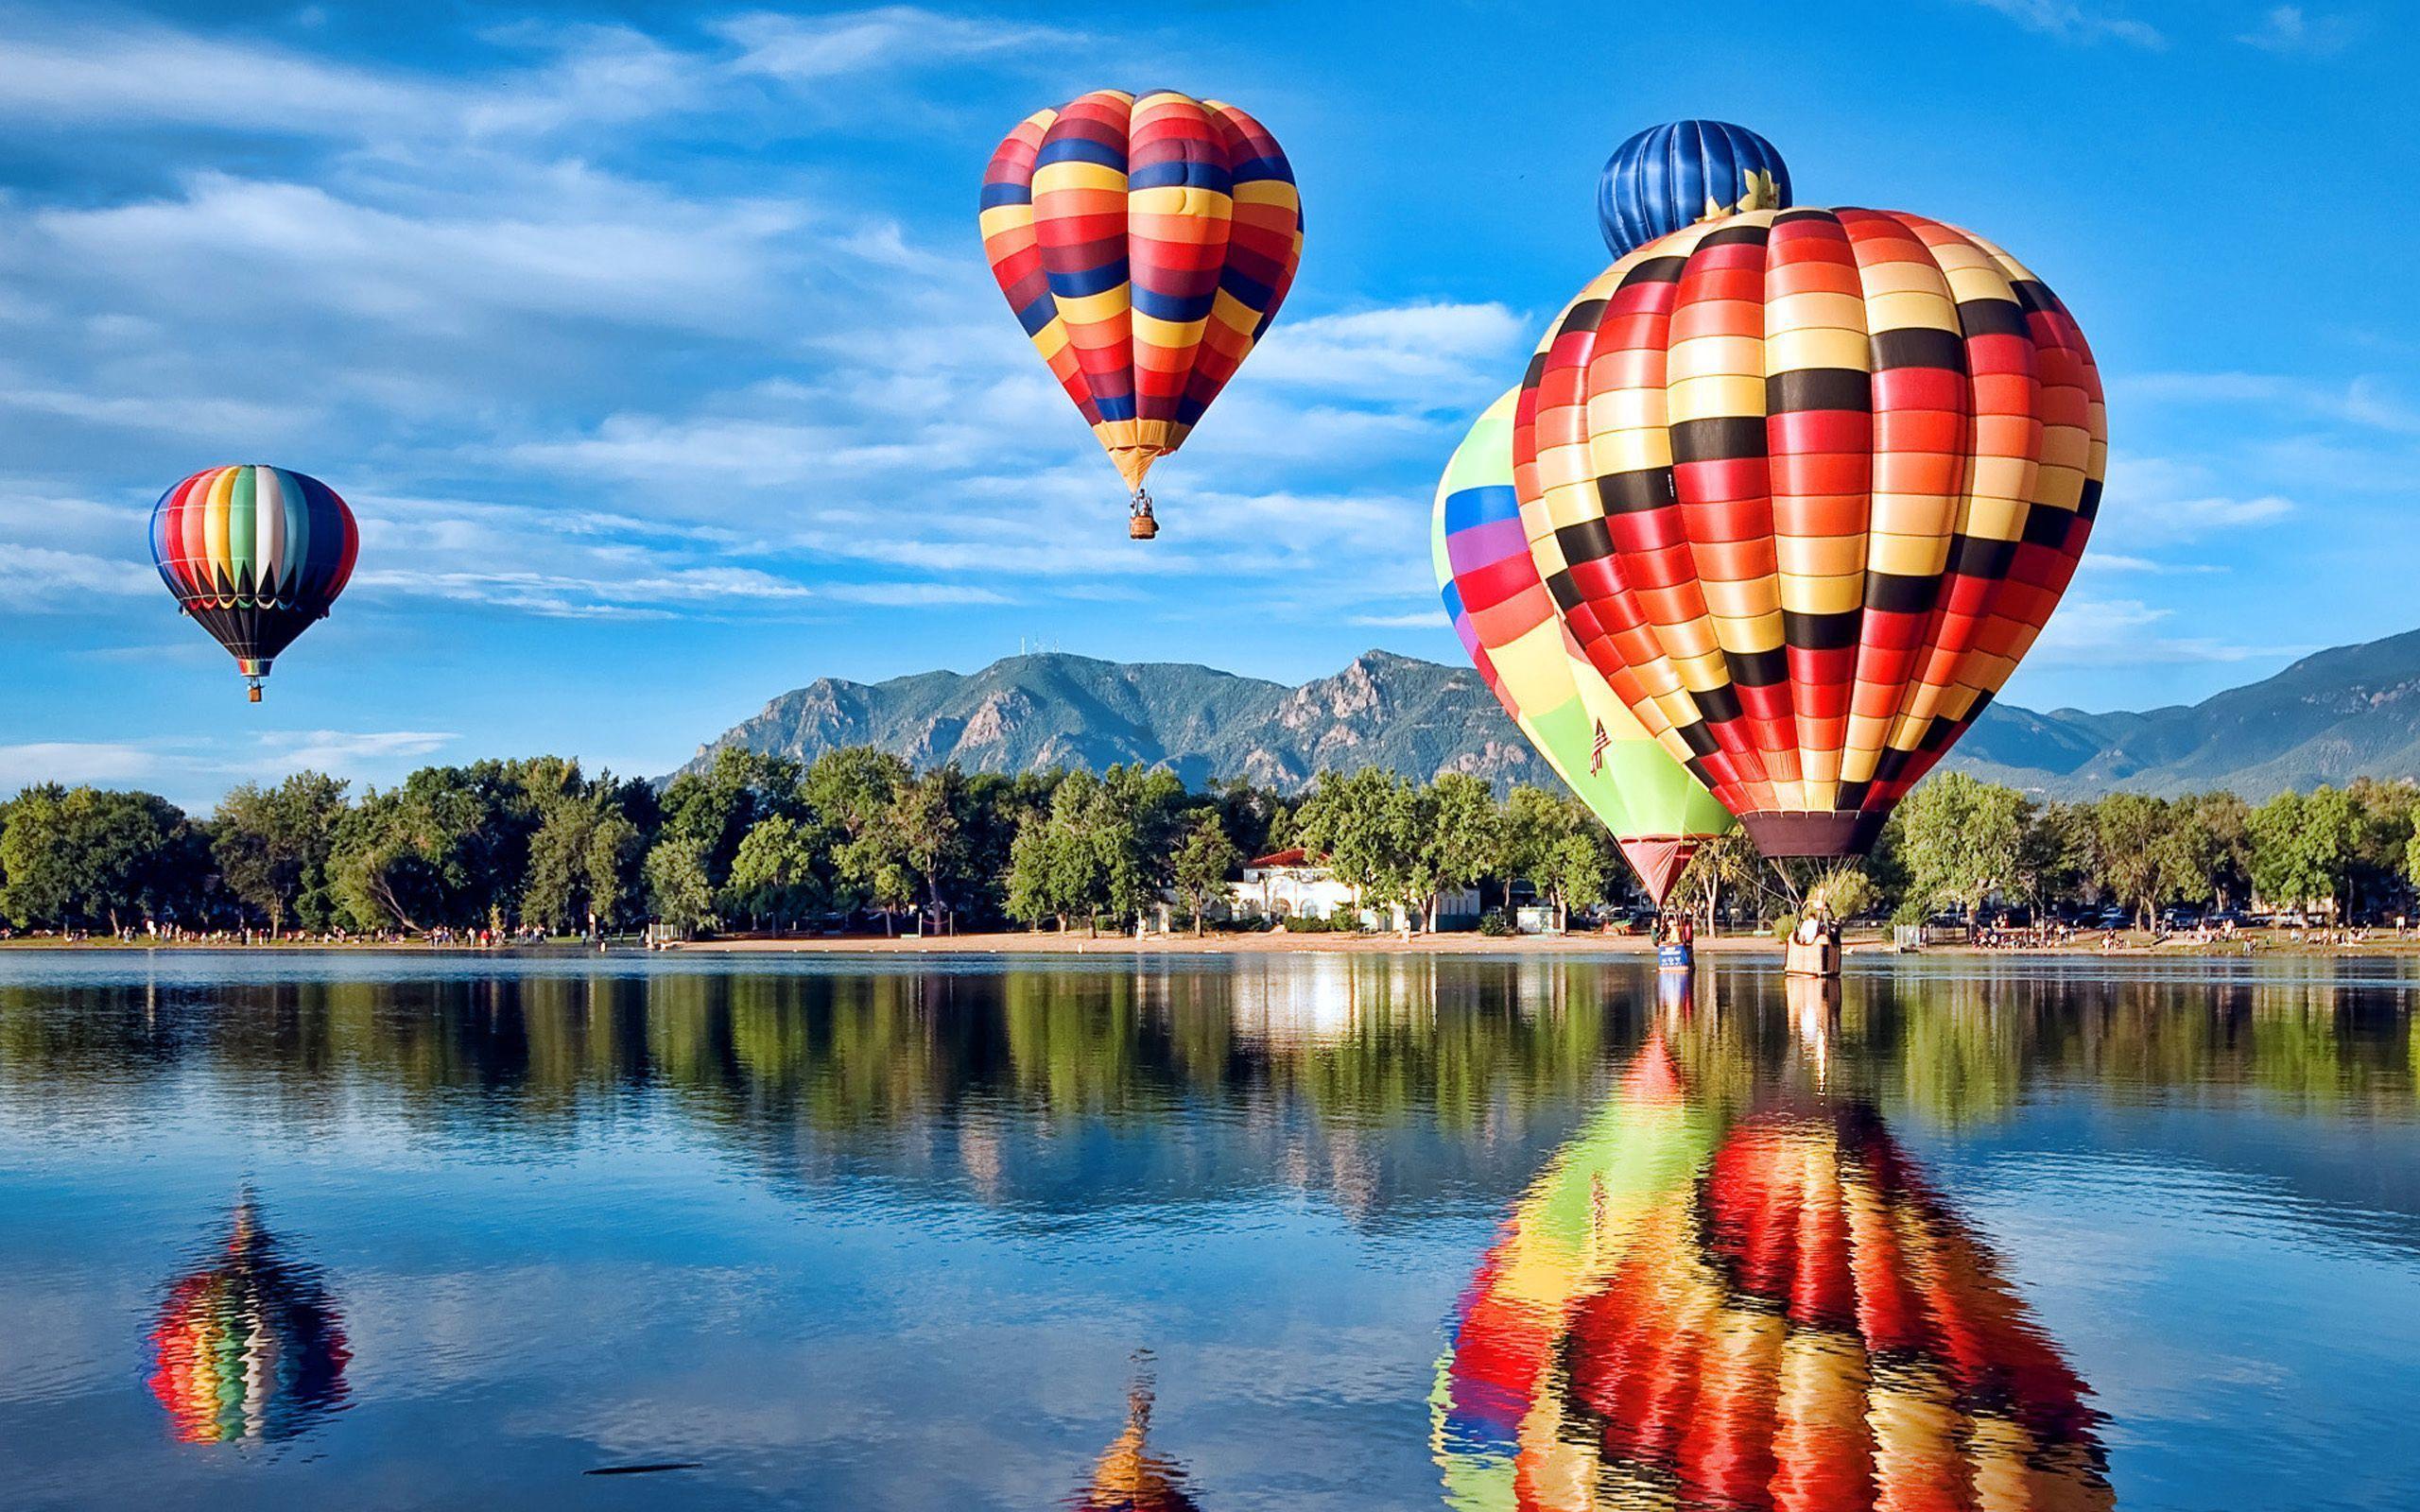 Hot Air Balloon Backgrounds Pictures to Pin